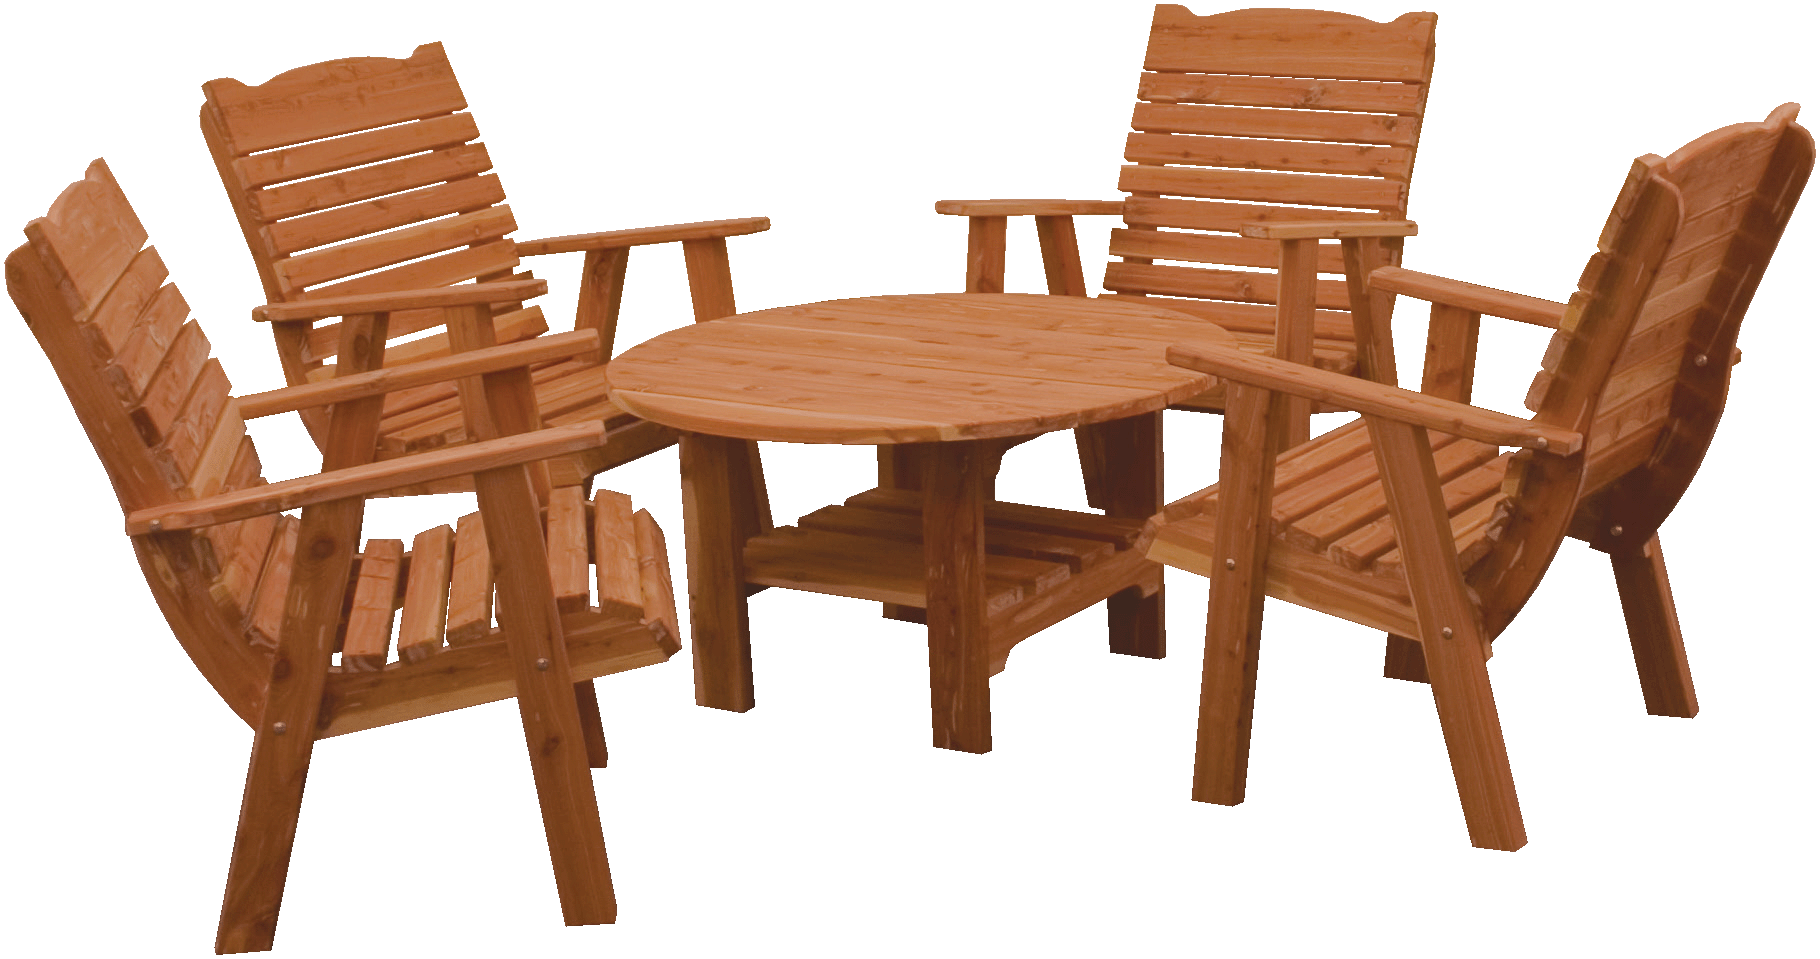 Amish-made cedar chat table 32" round